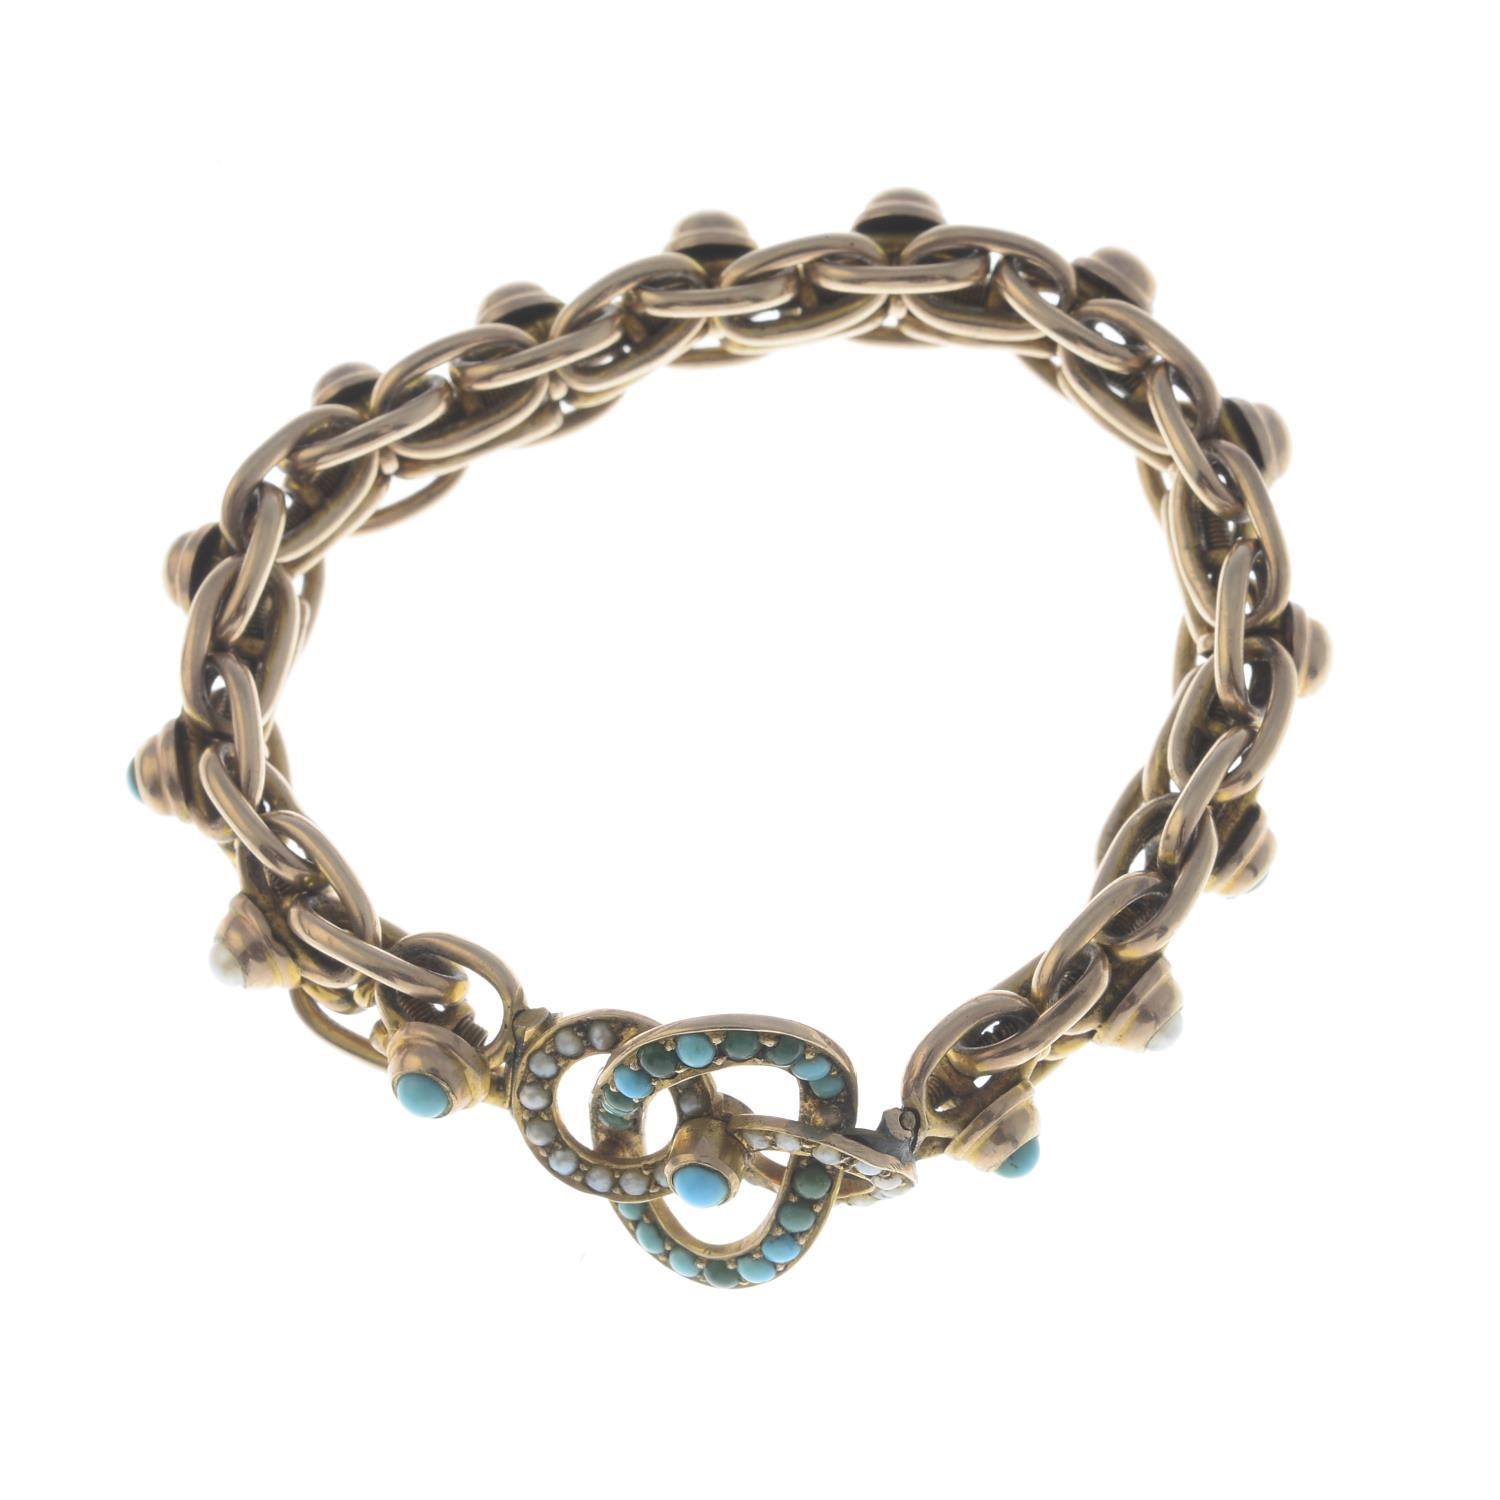 BERNARDO ANTICHITÀ PONTE VECCHIO FLORENCE

Of openwork design, the interlocking turquoise and split pearl clover, to the expanding bracelet. Length 14 to 19cms. Weight 19.3gms. 